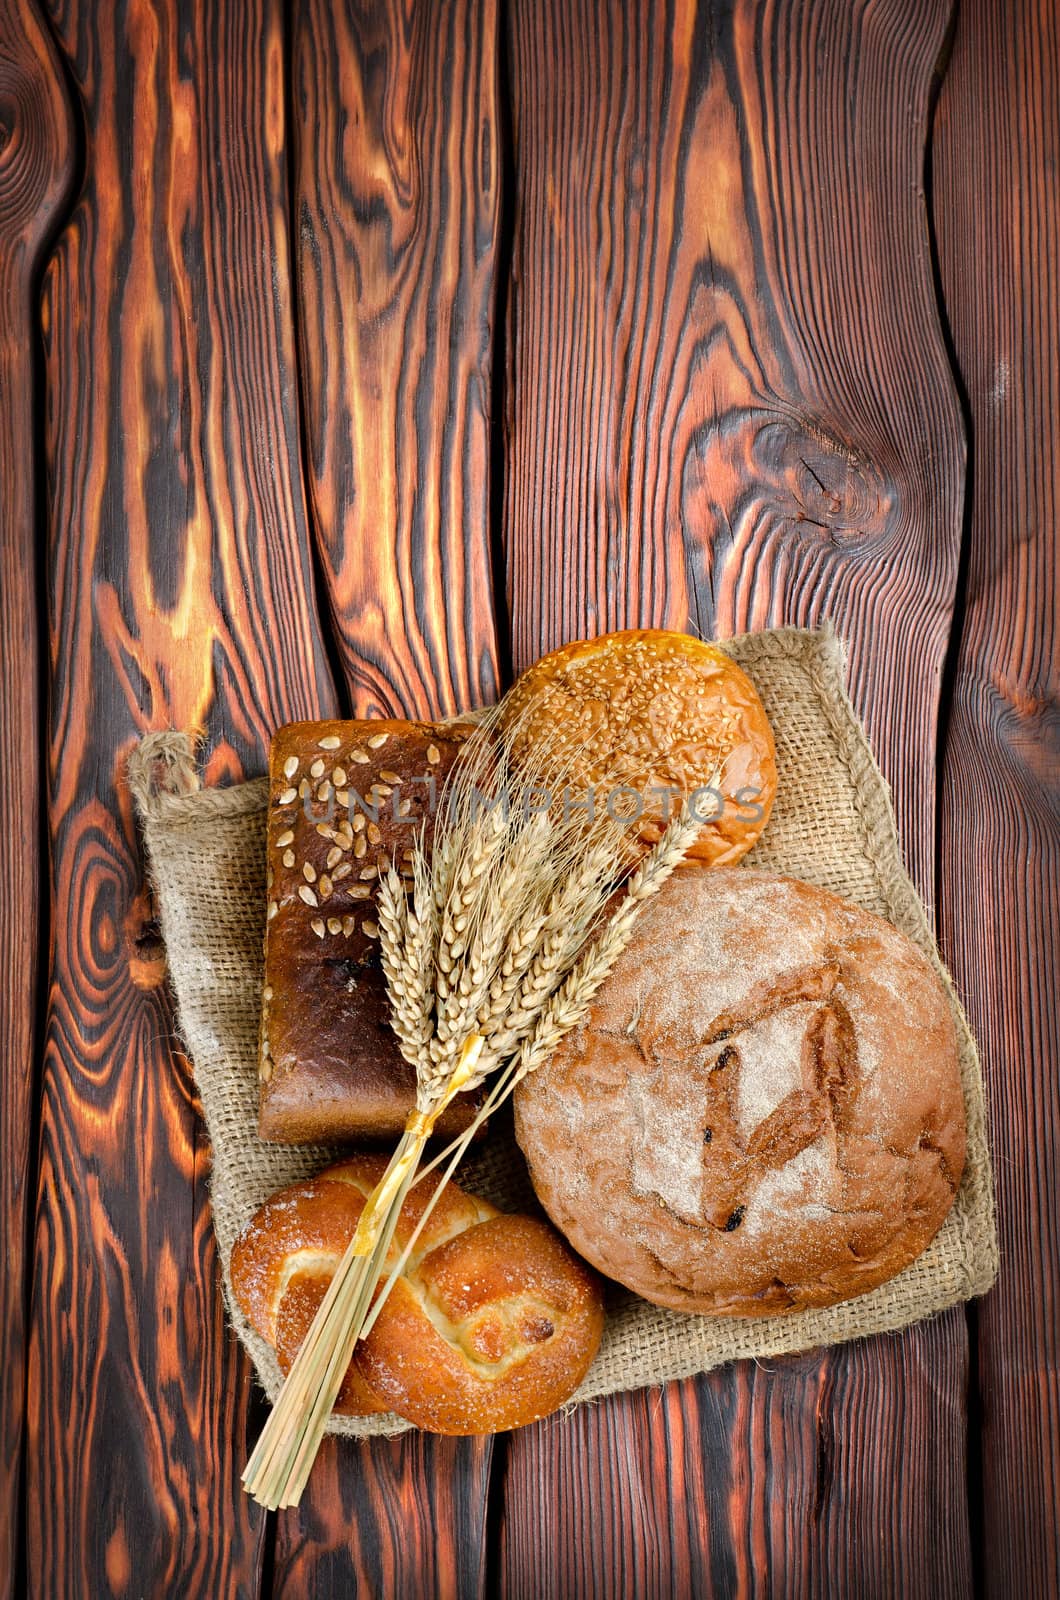 Bread and wheat by Givaga